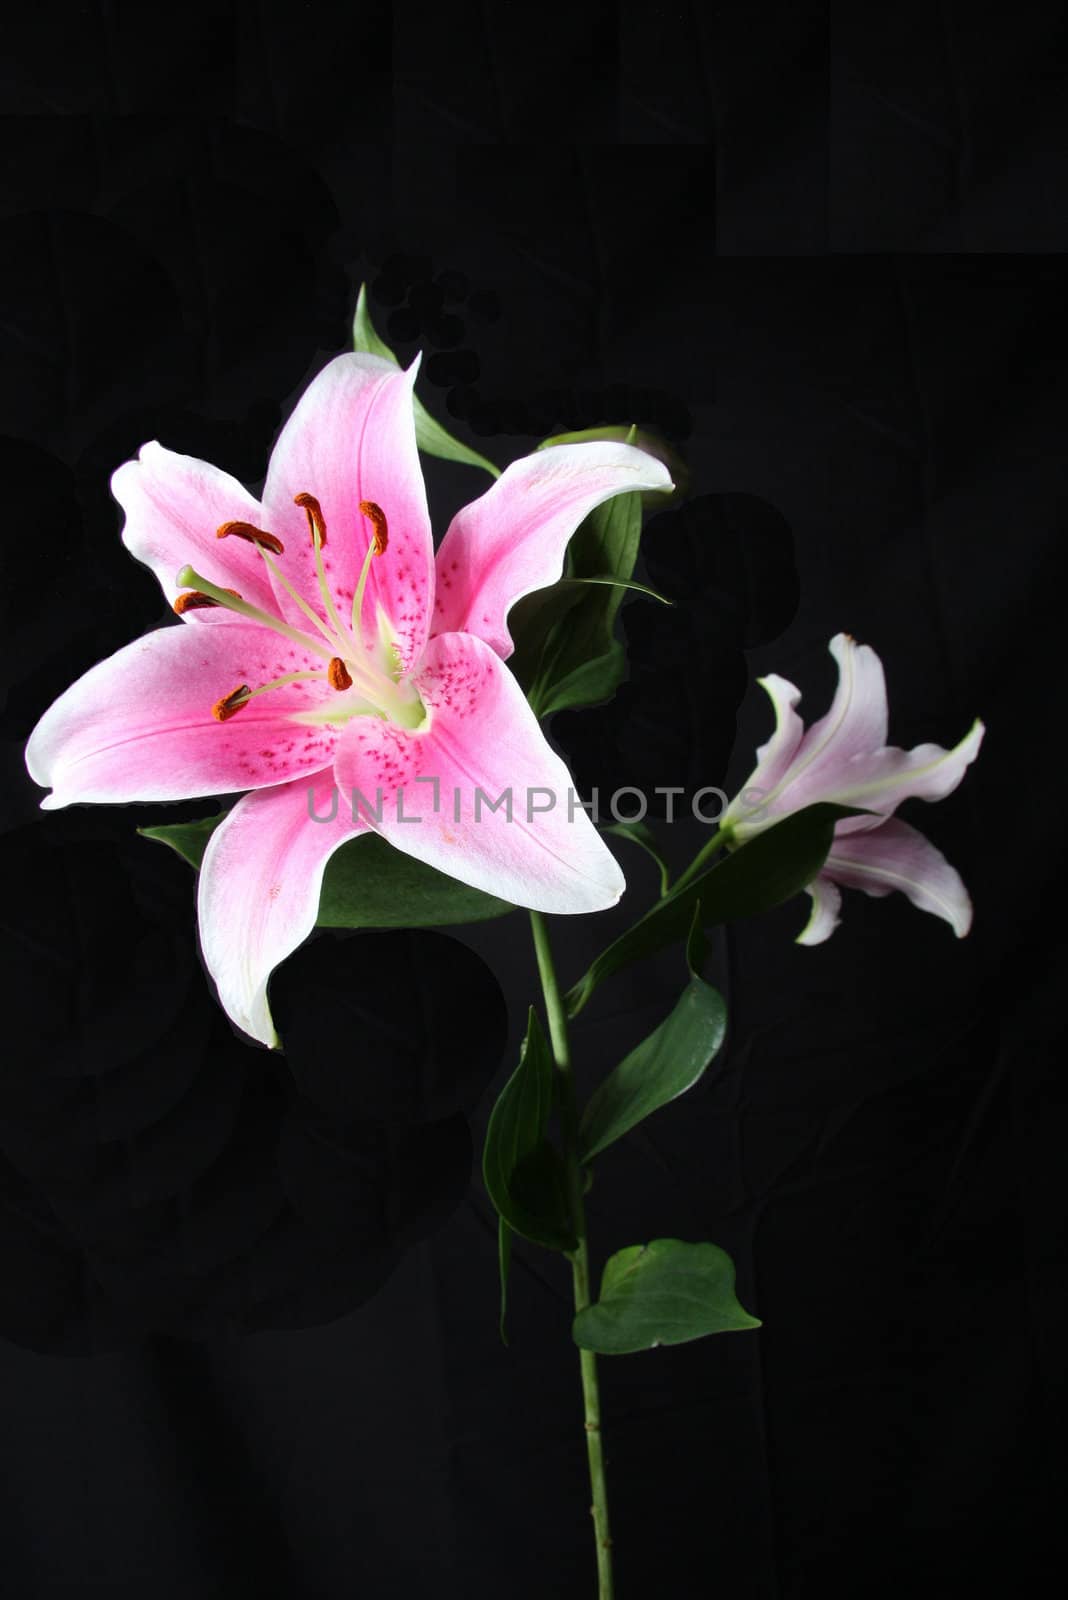 Two beautiful pink flowers on black background